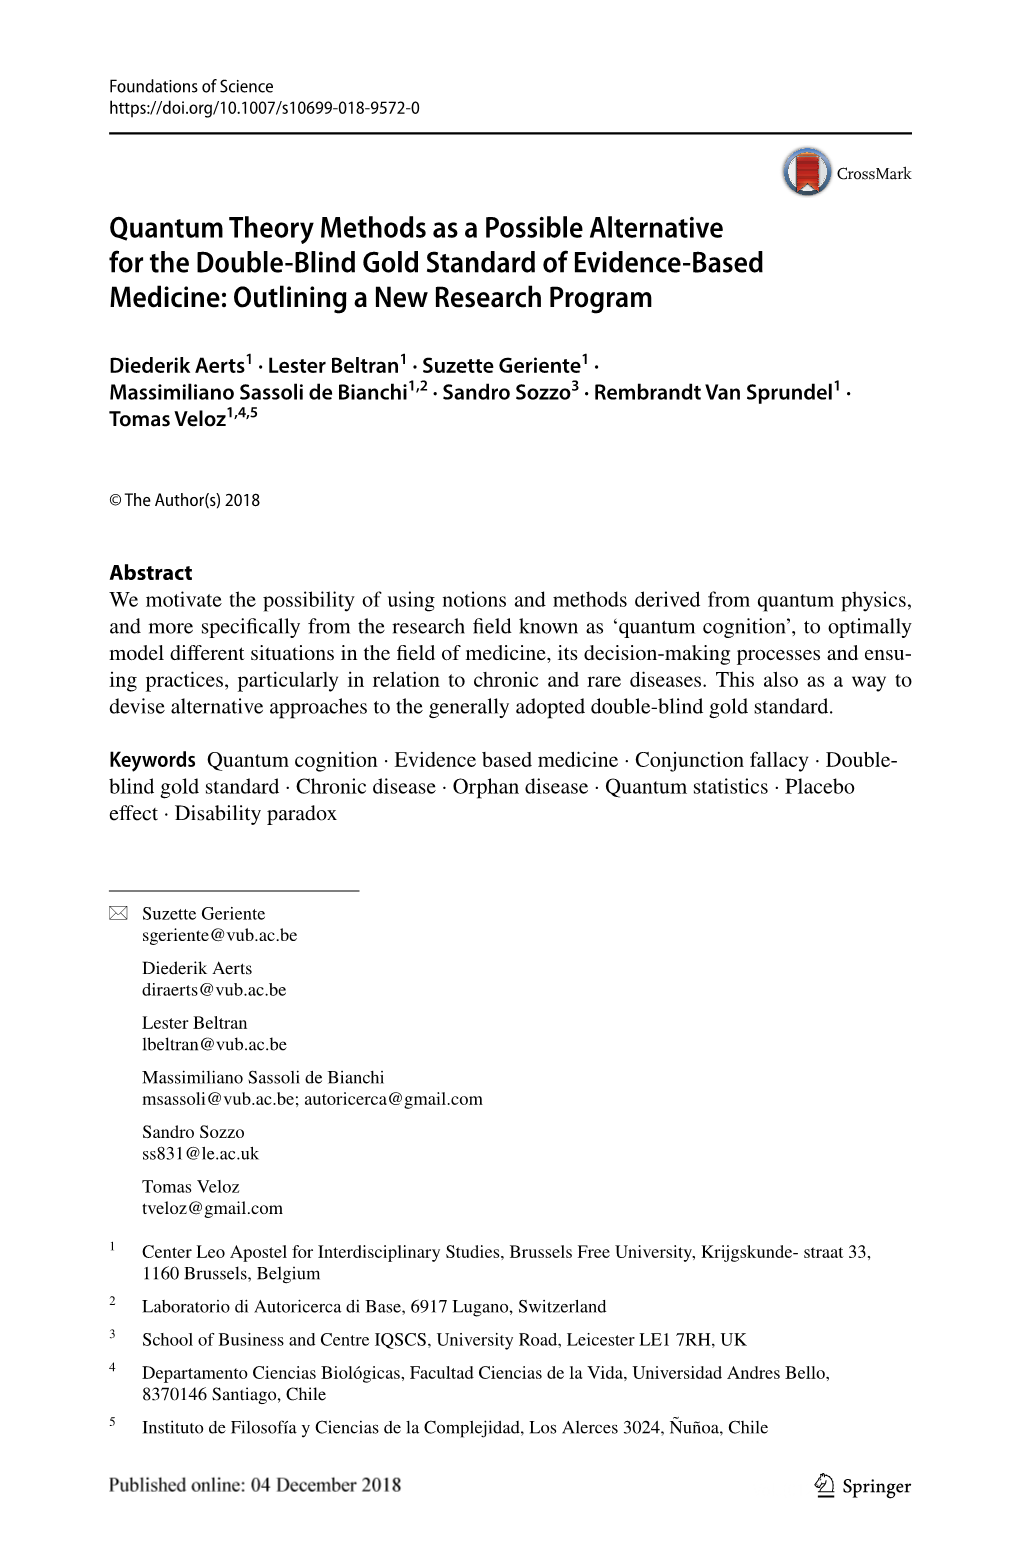 Quantum Theory Methods As a Possible Alternative for the Double‑Blind Gold Standard of Evidence‑Based Medicine: Outlining a New Research Program